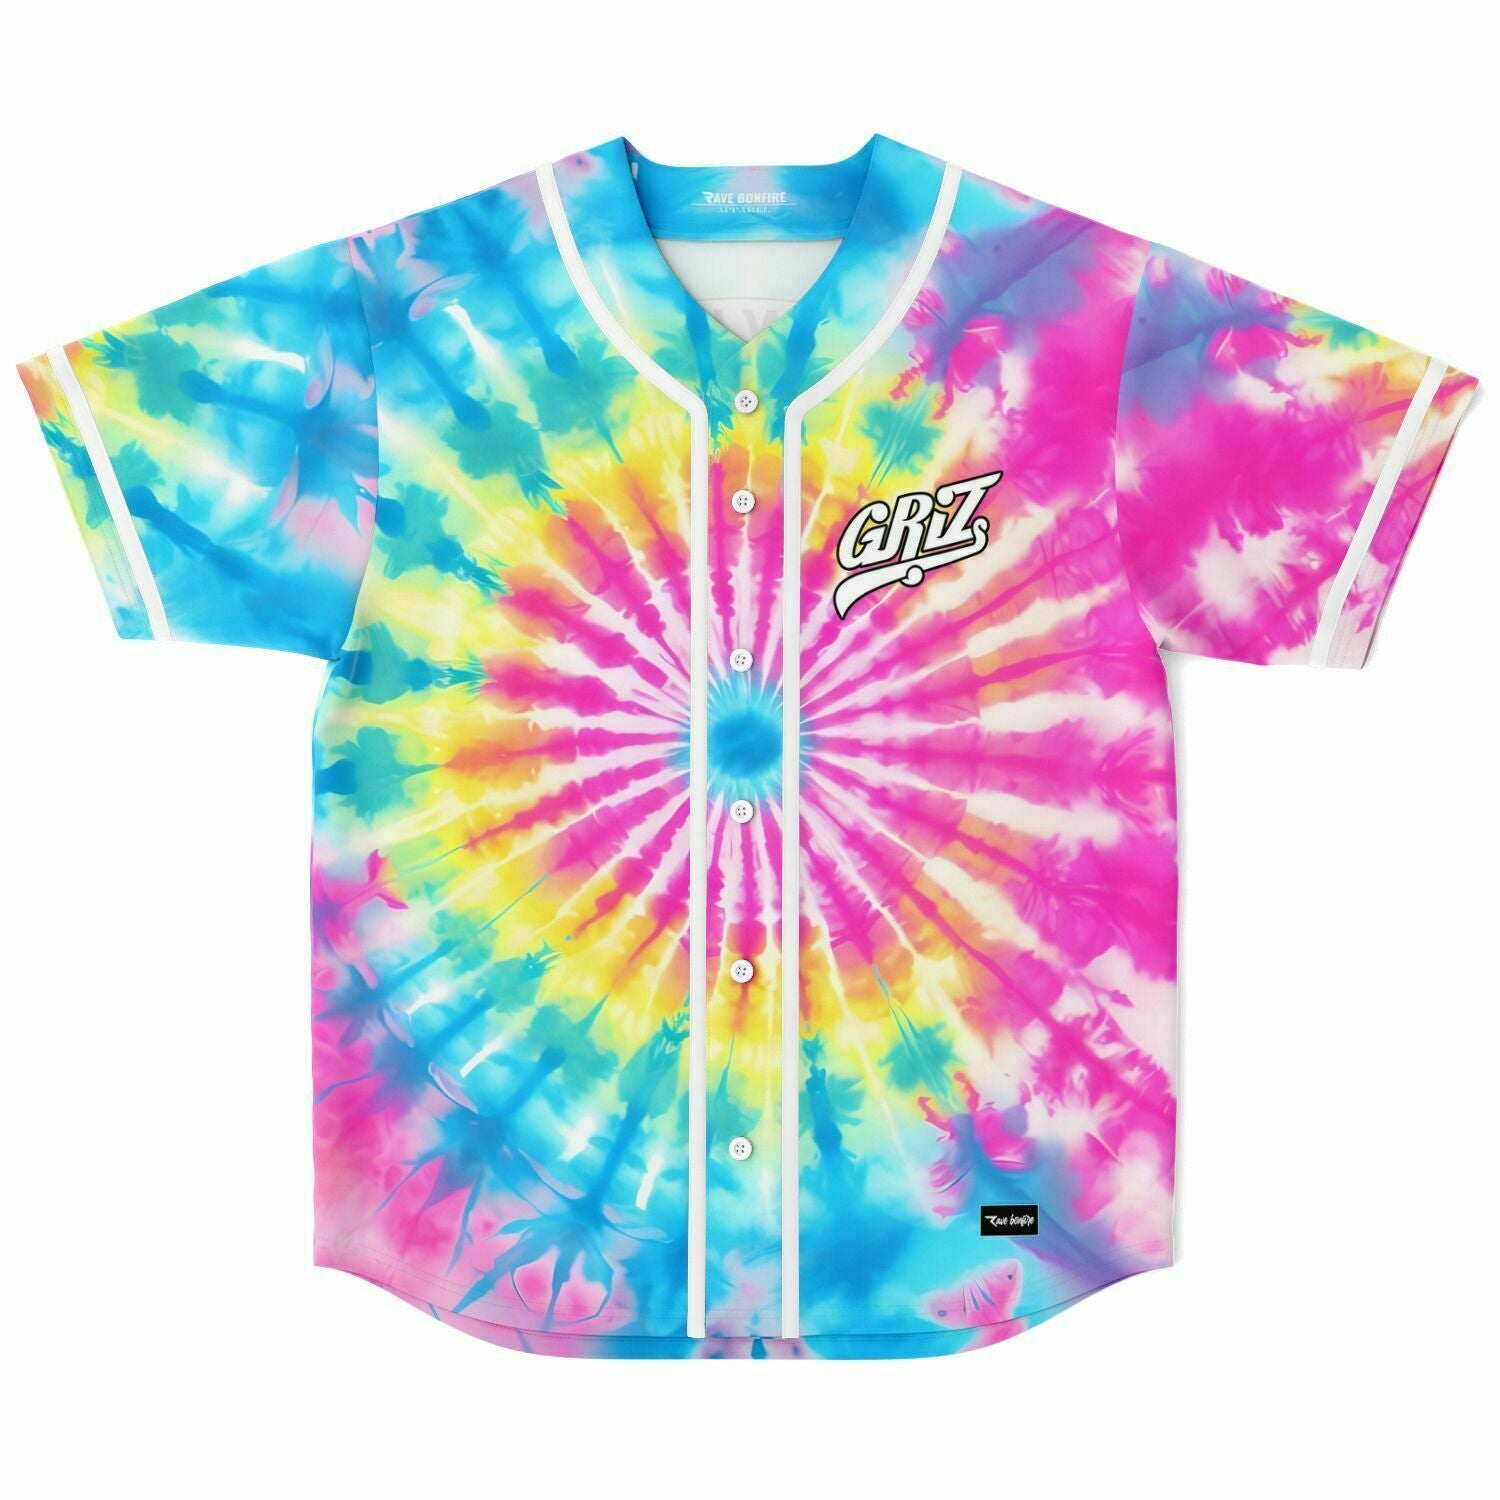 Griz tie dye baseball jersey with the word show love on it